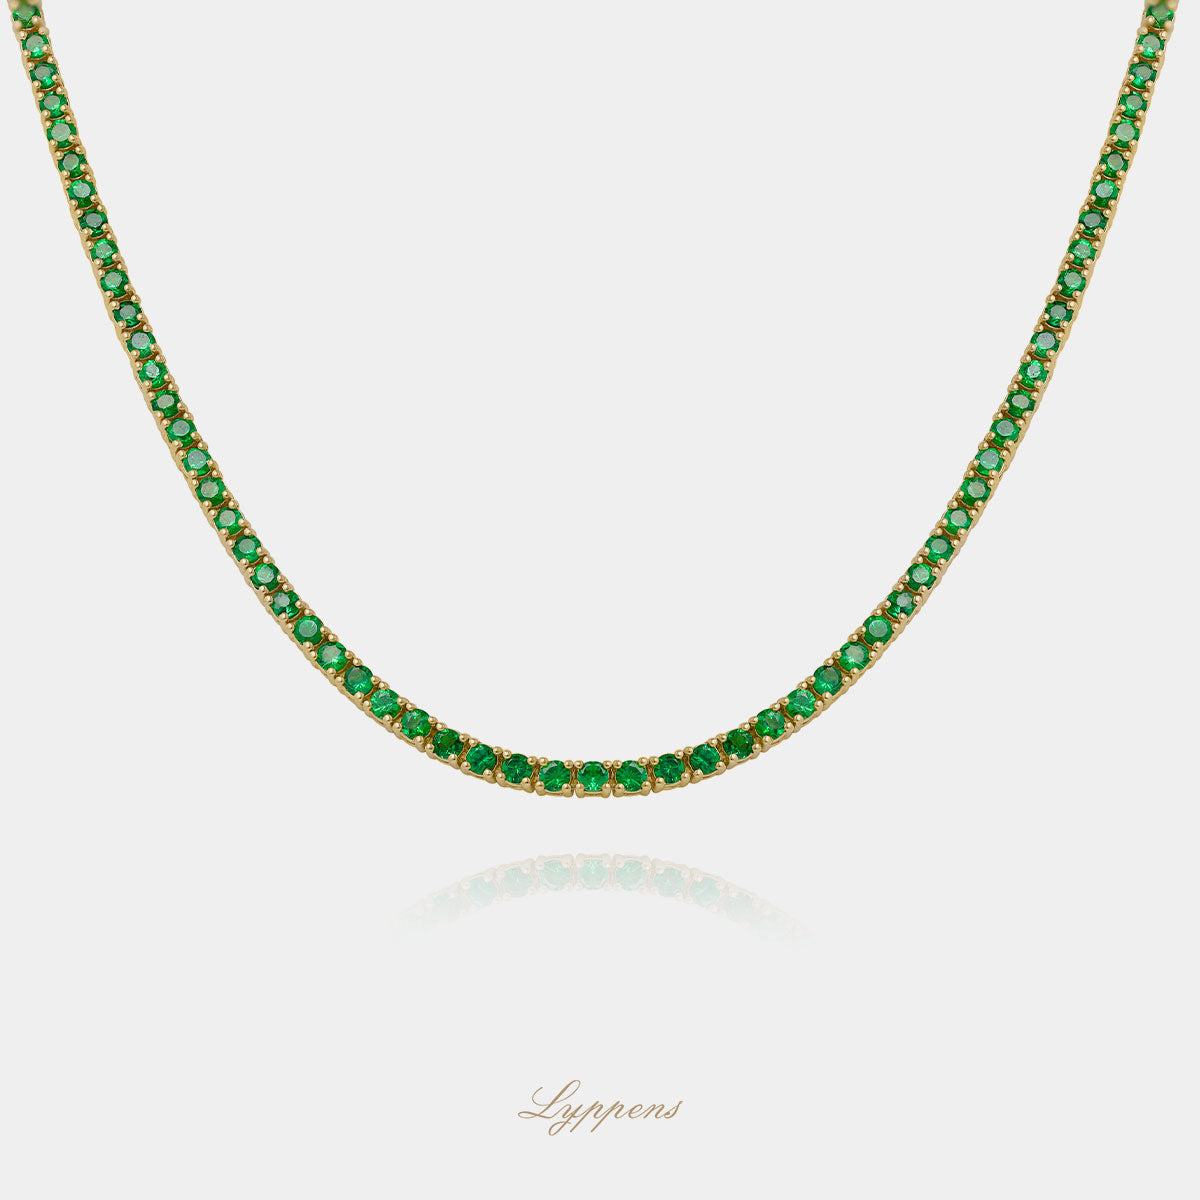 Yellow gold tennis necklace with tsavorite 6.44ct